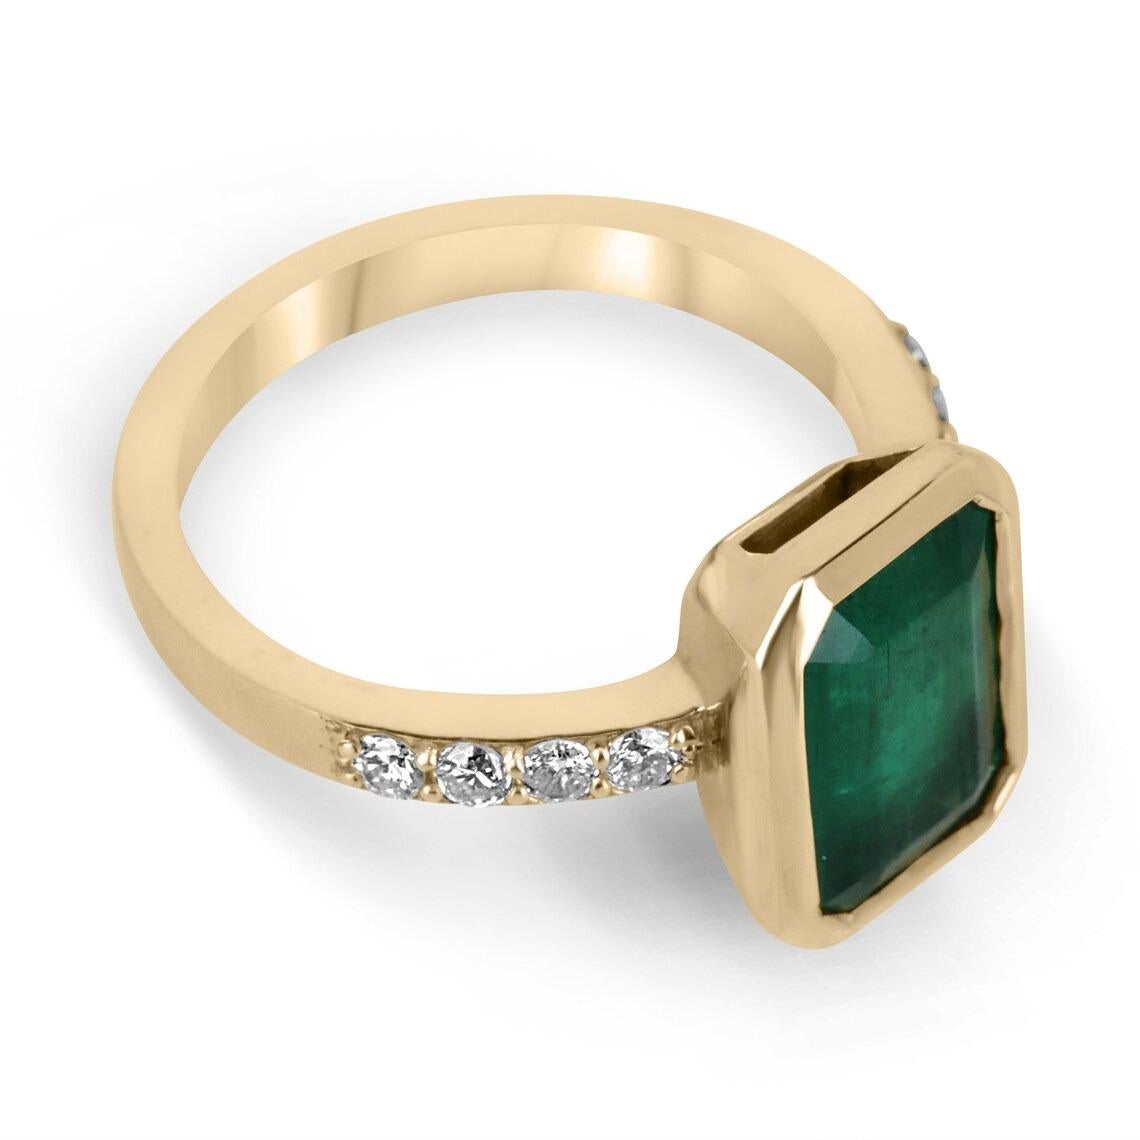 A glowing fine quality Zambian emerald bezel and diamond accent ring. This spectacular piece features an elongated emerald cut emerald; the gemstone showcases a rich dark green color that is vivacious and lustrous. Securely bezel set for the